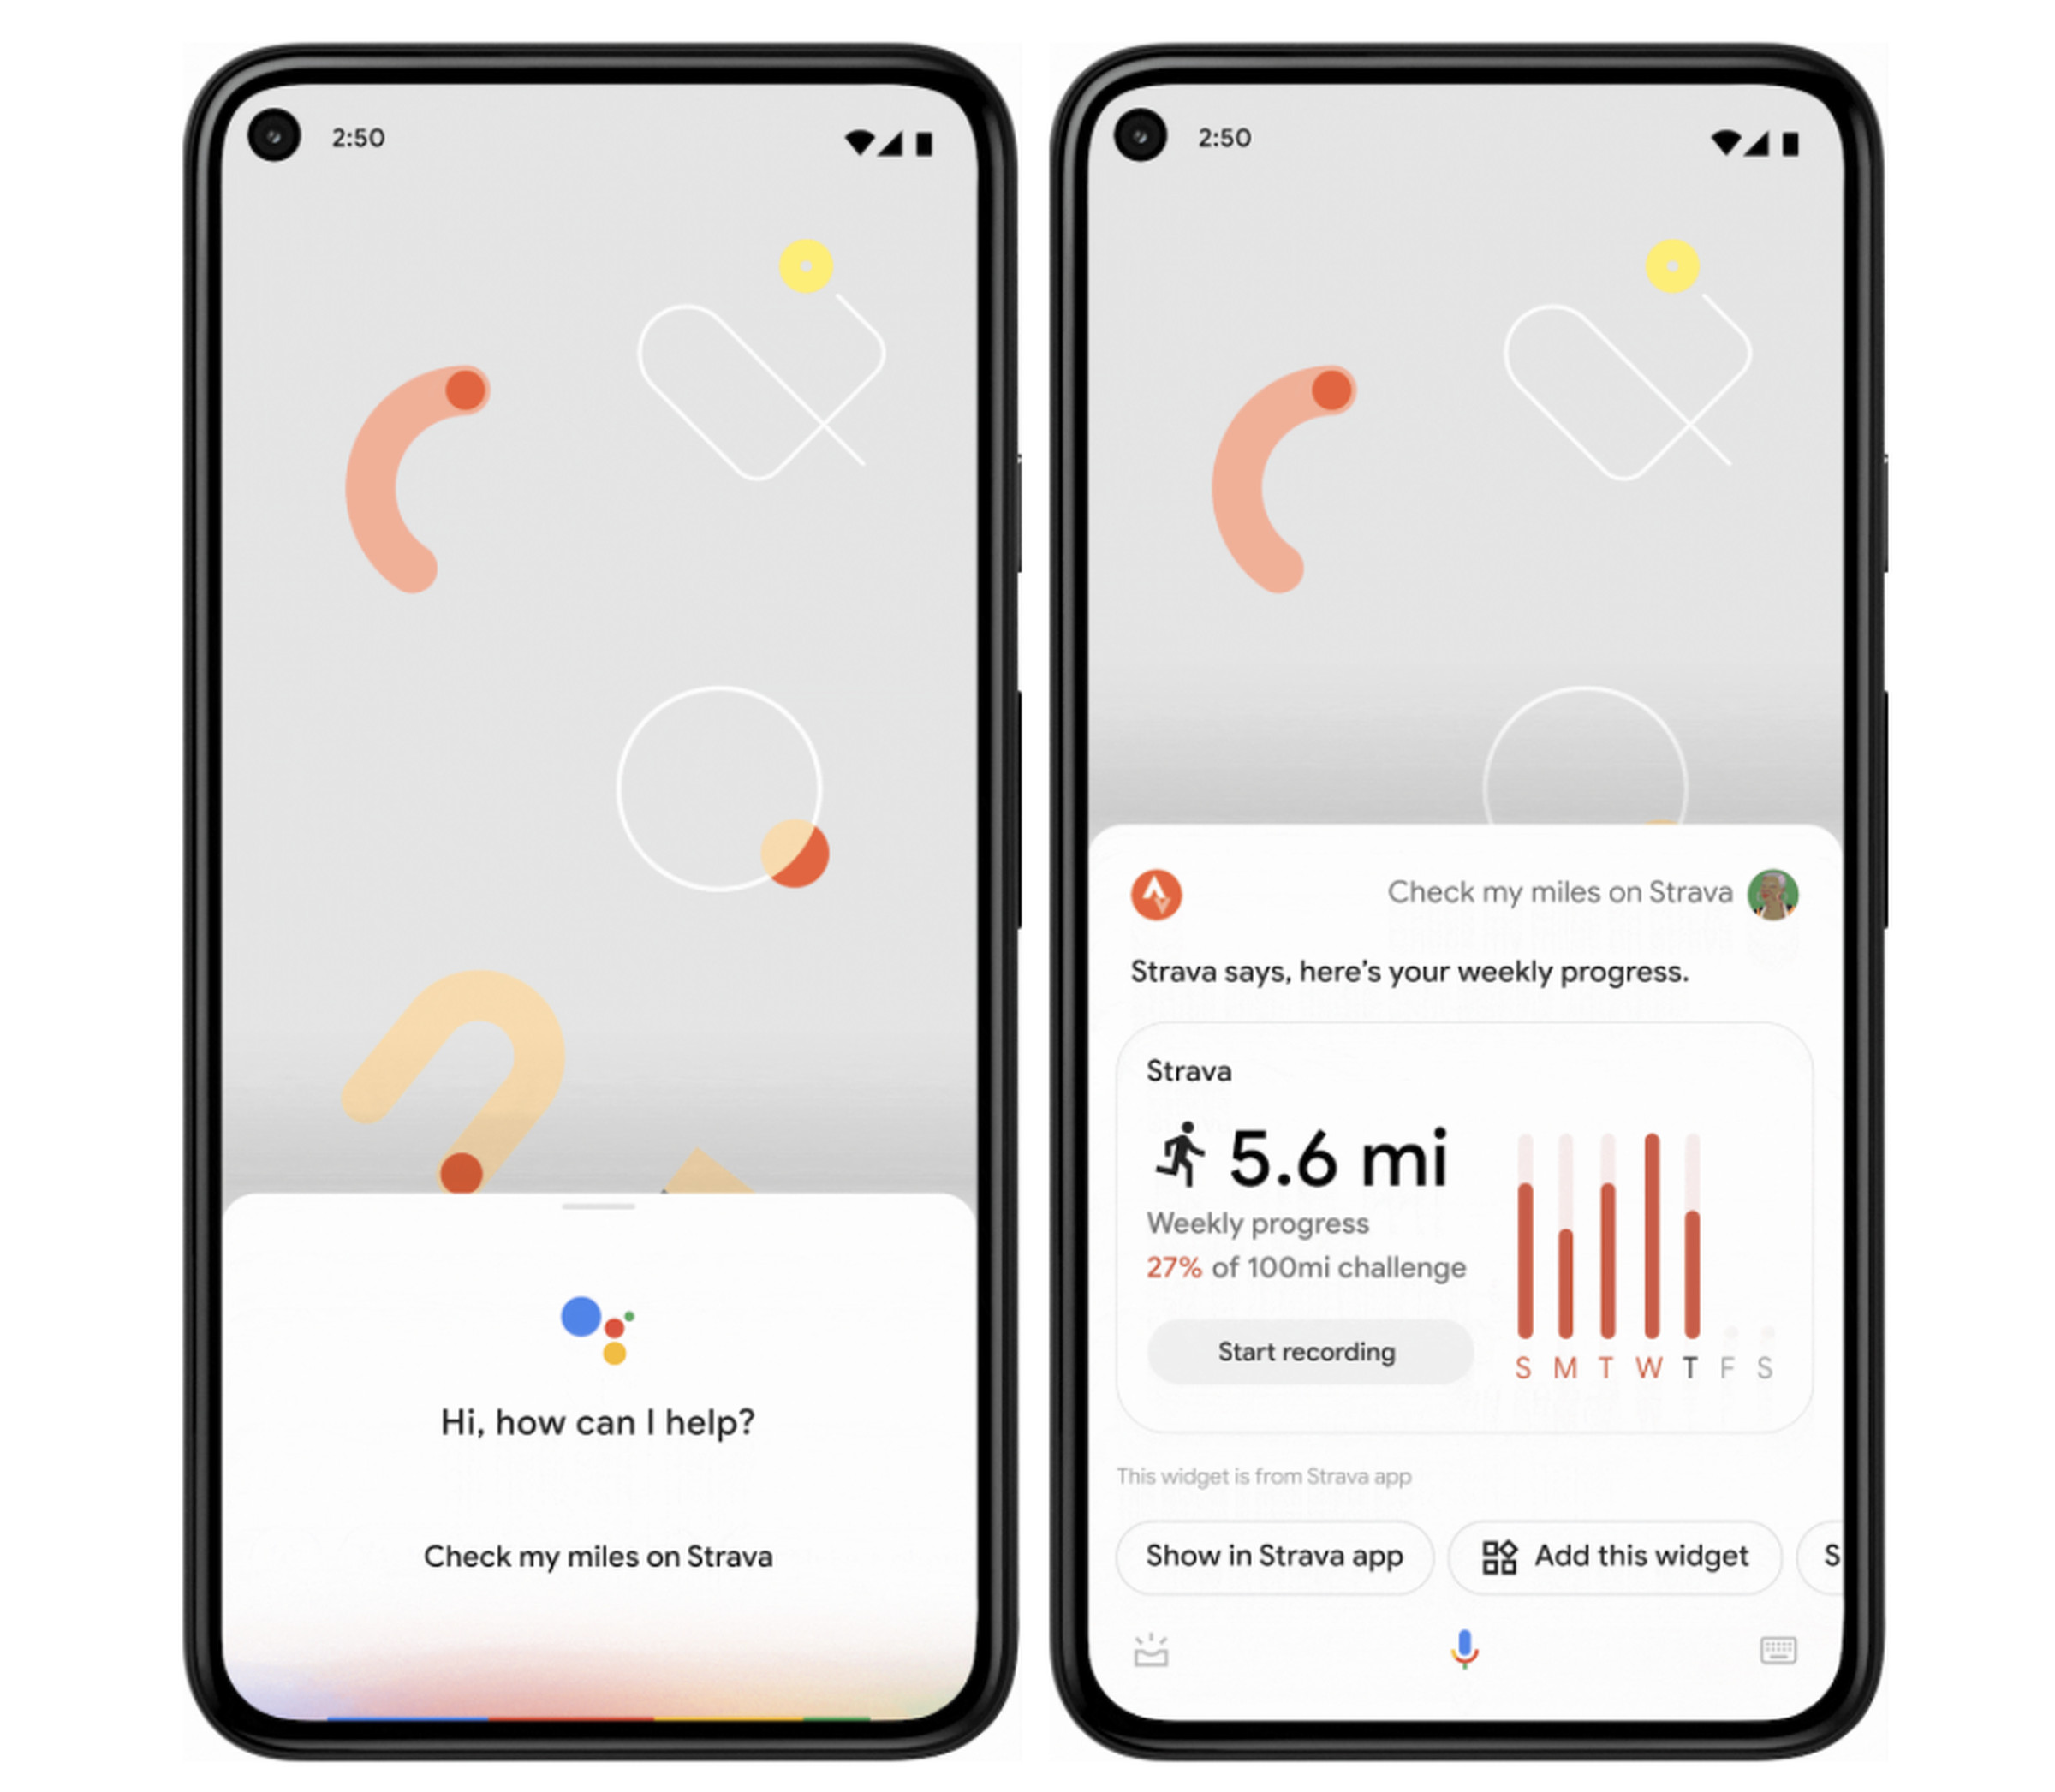 Google uses Strava as an example for the widget view that will be available in Assistant.